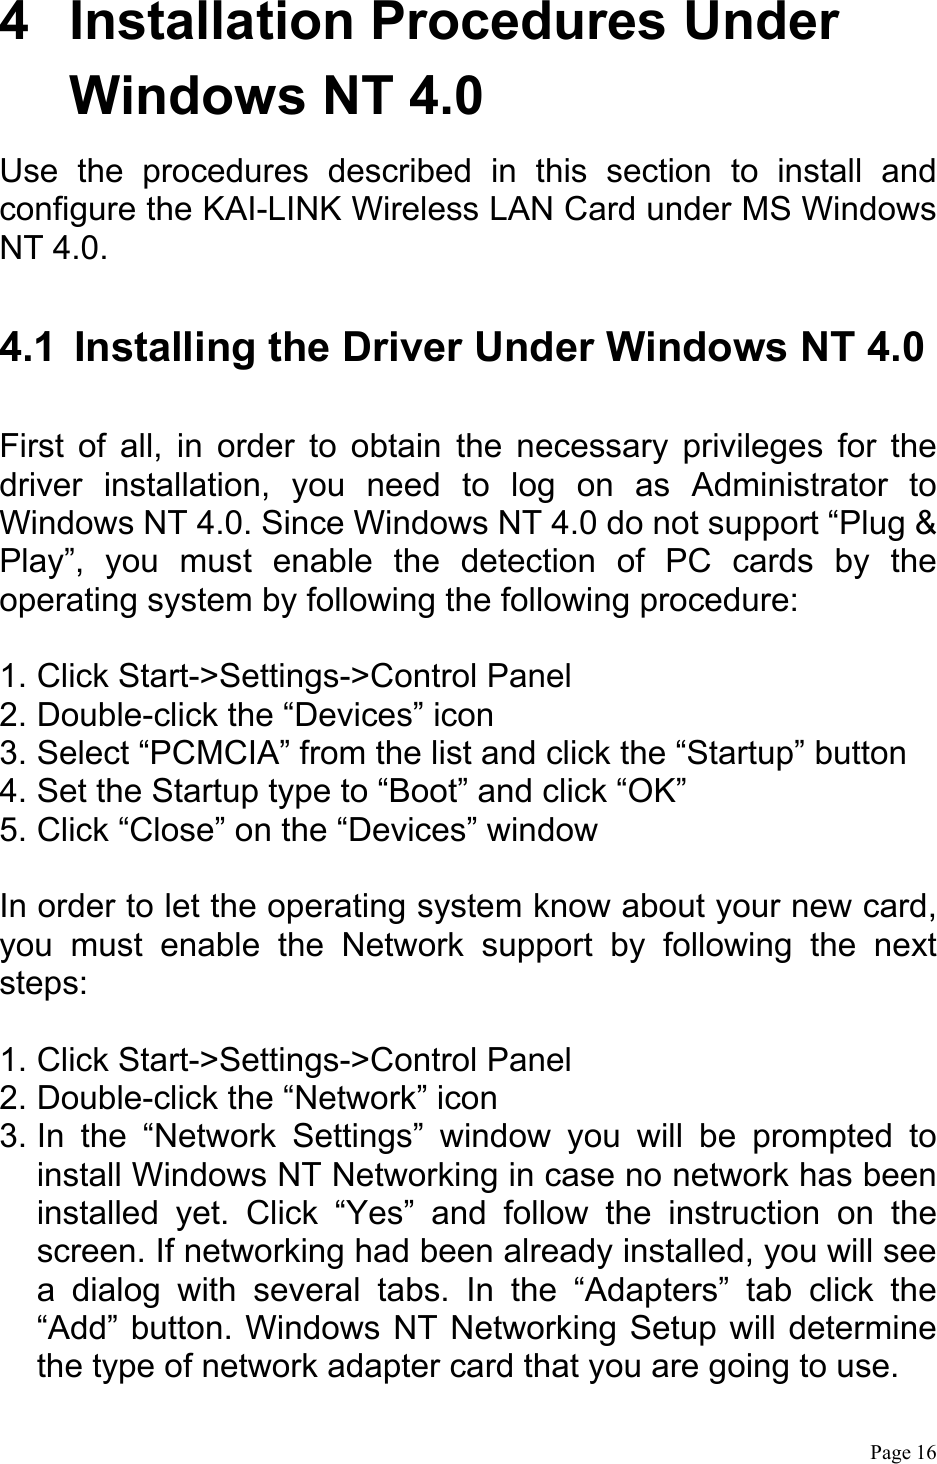  Page 16  4  Installation Procedures Under Windows NT 4.0 Use the procedures described in this section to install and configure the KAI-LINK Wireless LAN Card under MS Windows NT 4.0.  4.1  Installing the Driver Under Windows NT 4.0  First of all, in order to obtain the necessary privileges for the driver installation, you need to log on as Administrator to Windows NT 4.0. Since Windows NT 4.0 do not support “Plug &amp; Play”, you must enable the detection of PC cards by the operating system by following the following procedure:  1. Click Start-&gt;Settings-&gt;Control Panel 2. Double-click the “Devices” icon 3. Select “PCMCIA” from the list and click the “Startup” button   4. Set the Startup type to “Boot” and click “OK” 5. Click “Close” on the “Devices” window  In order to let the operating system know about your new card, you must enable the Network support by following the next steps:  1. Click Start-&gt;Settings-&gt;Control Panel 2. Double-click the “Network” icon 3. In the “Network Settings” window you will be prompted to install Windows NT Networking in case no network has been installed yet. Click “Yes” and follow the instruction on the screen. If networking had been already installed, you will see a dialog with several tabs. In the “Adapters” tab click the “Add” button. Windows NT Networking Setup will determine the type of network adapter card that you are going to use. 